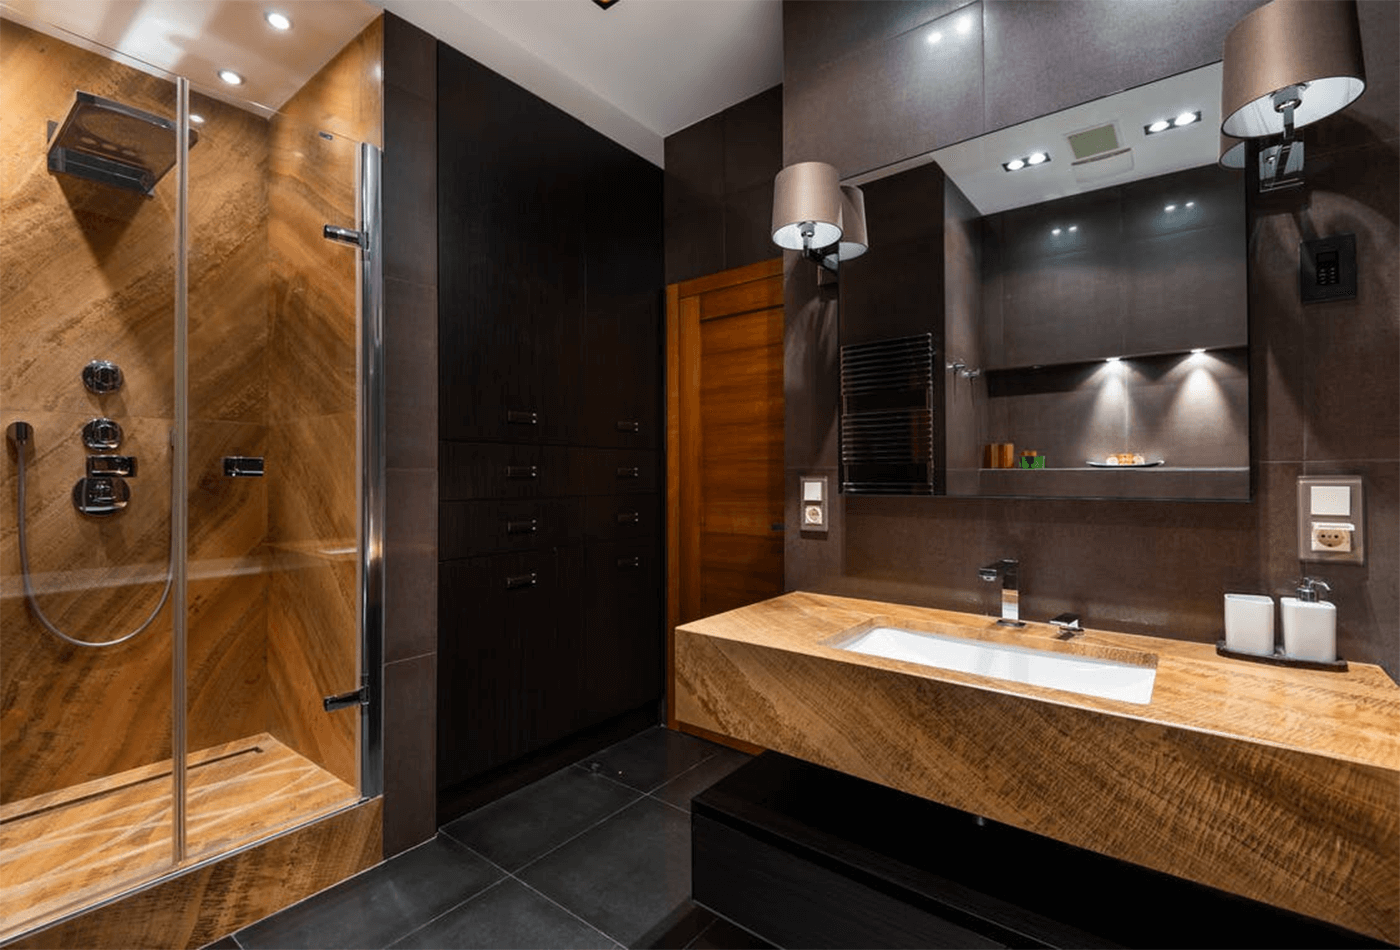 Gold Kitchen and Bathrooms for a Midas-Touch